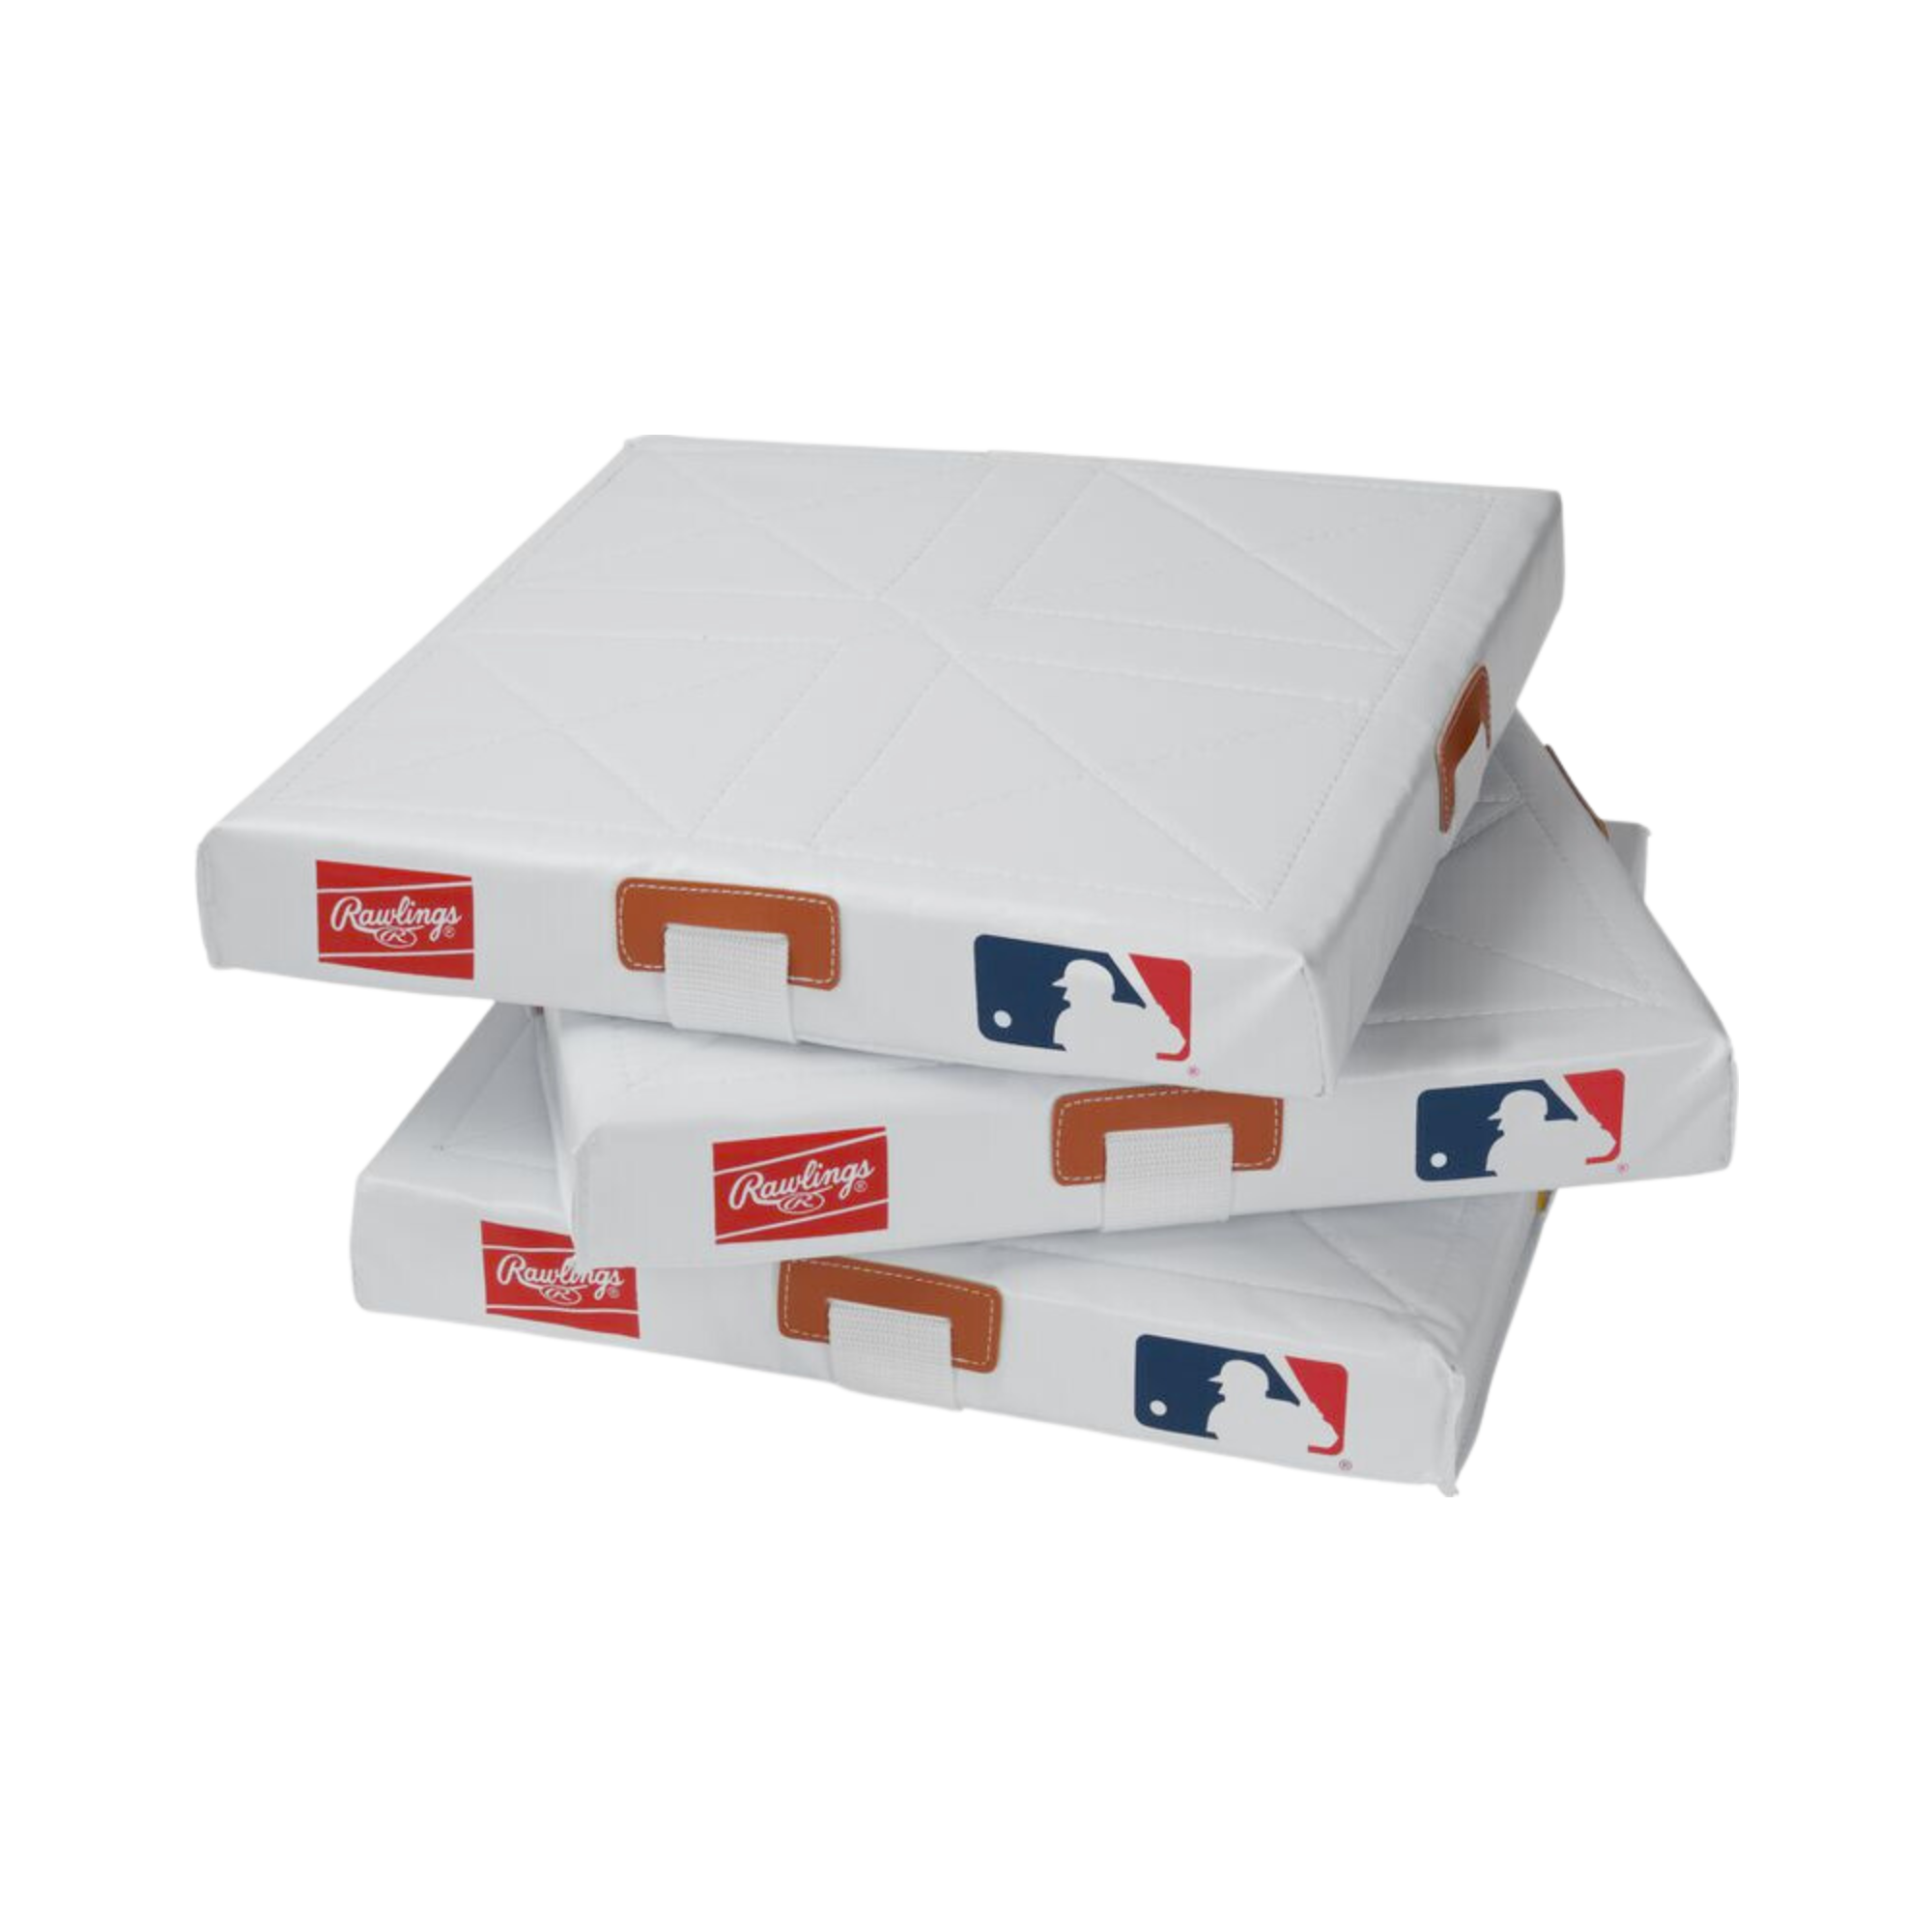 Rawlings Quilted Base Set - Set Of 3 Youth Bases - 14" X 14" X 2"